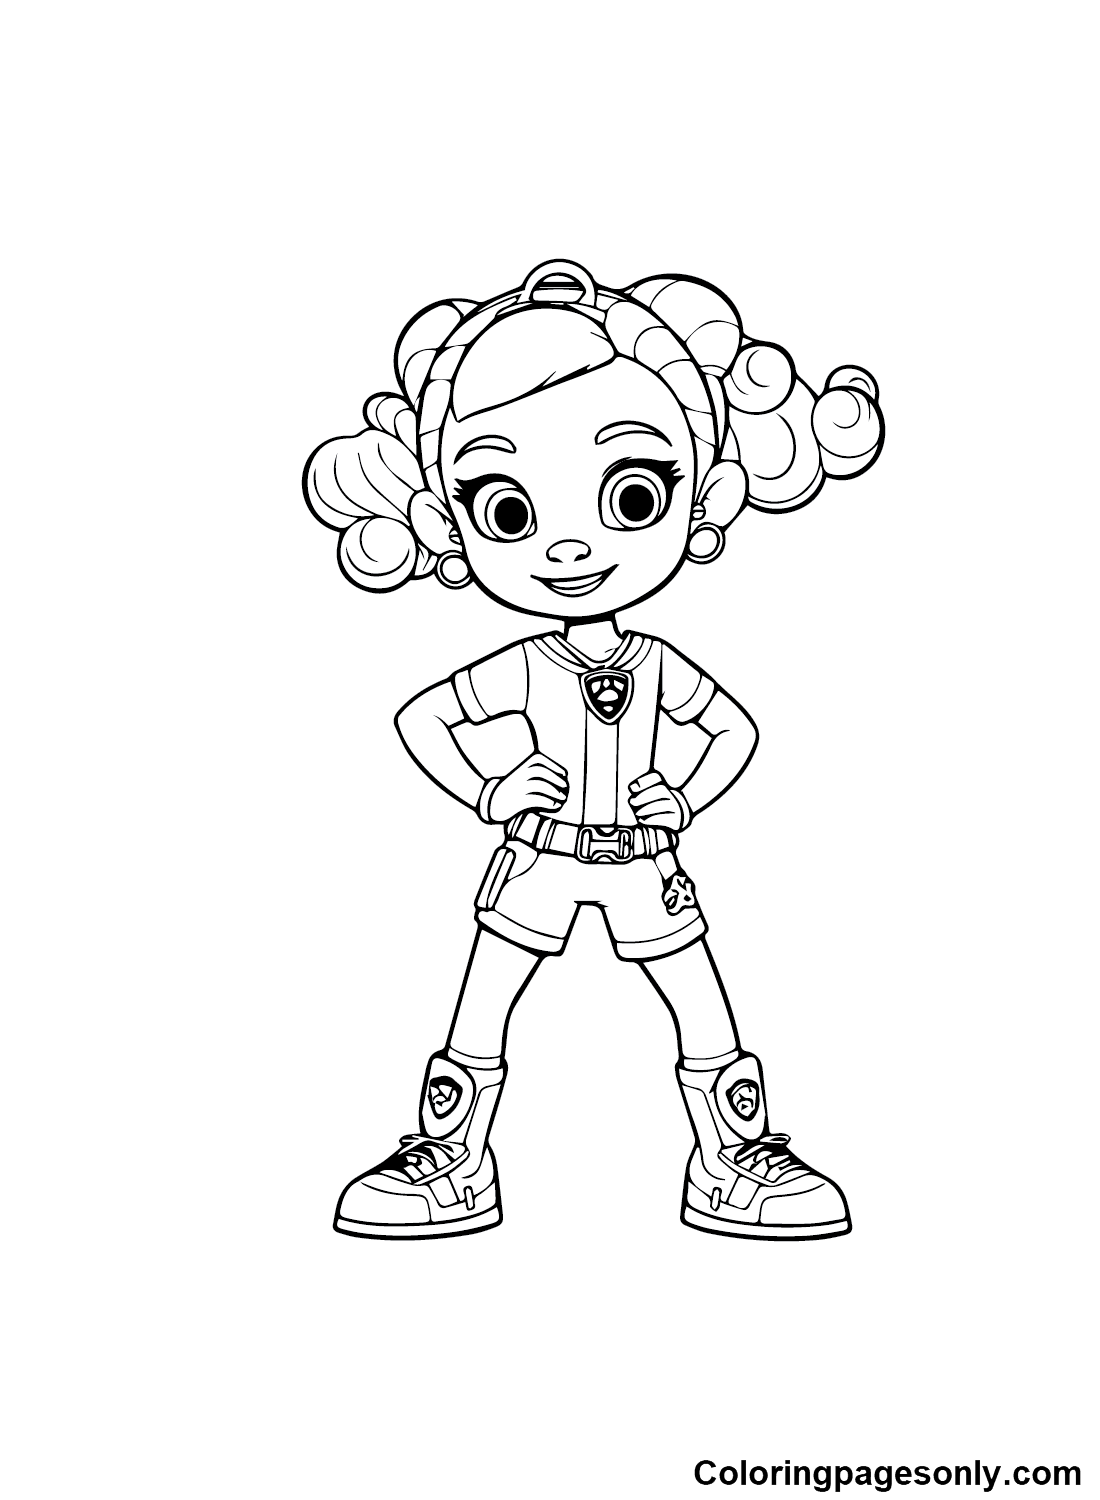 Adorable Rainbow Rangers Coloring Pages